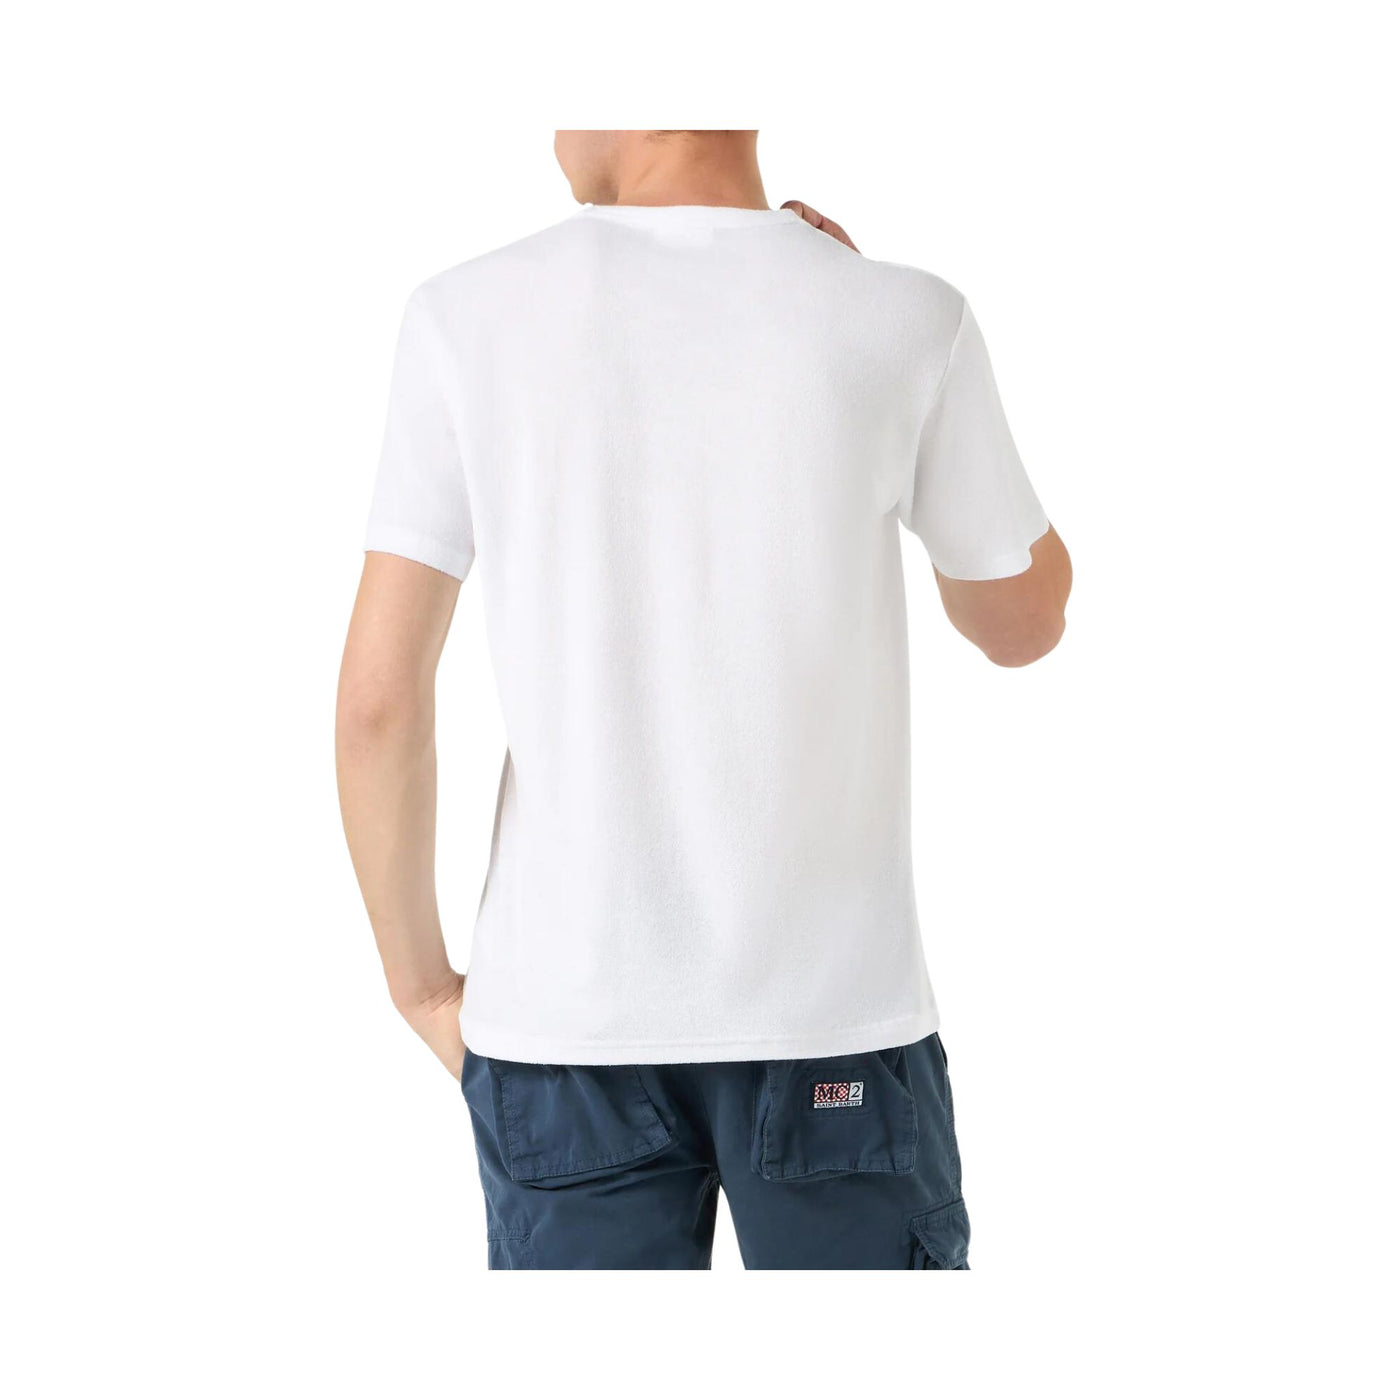 Men's T-shirt with embroidered palm